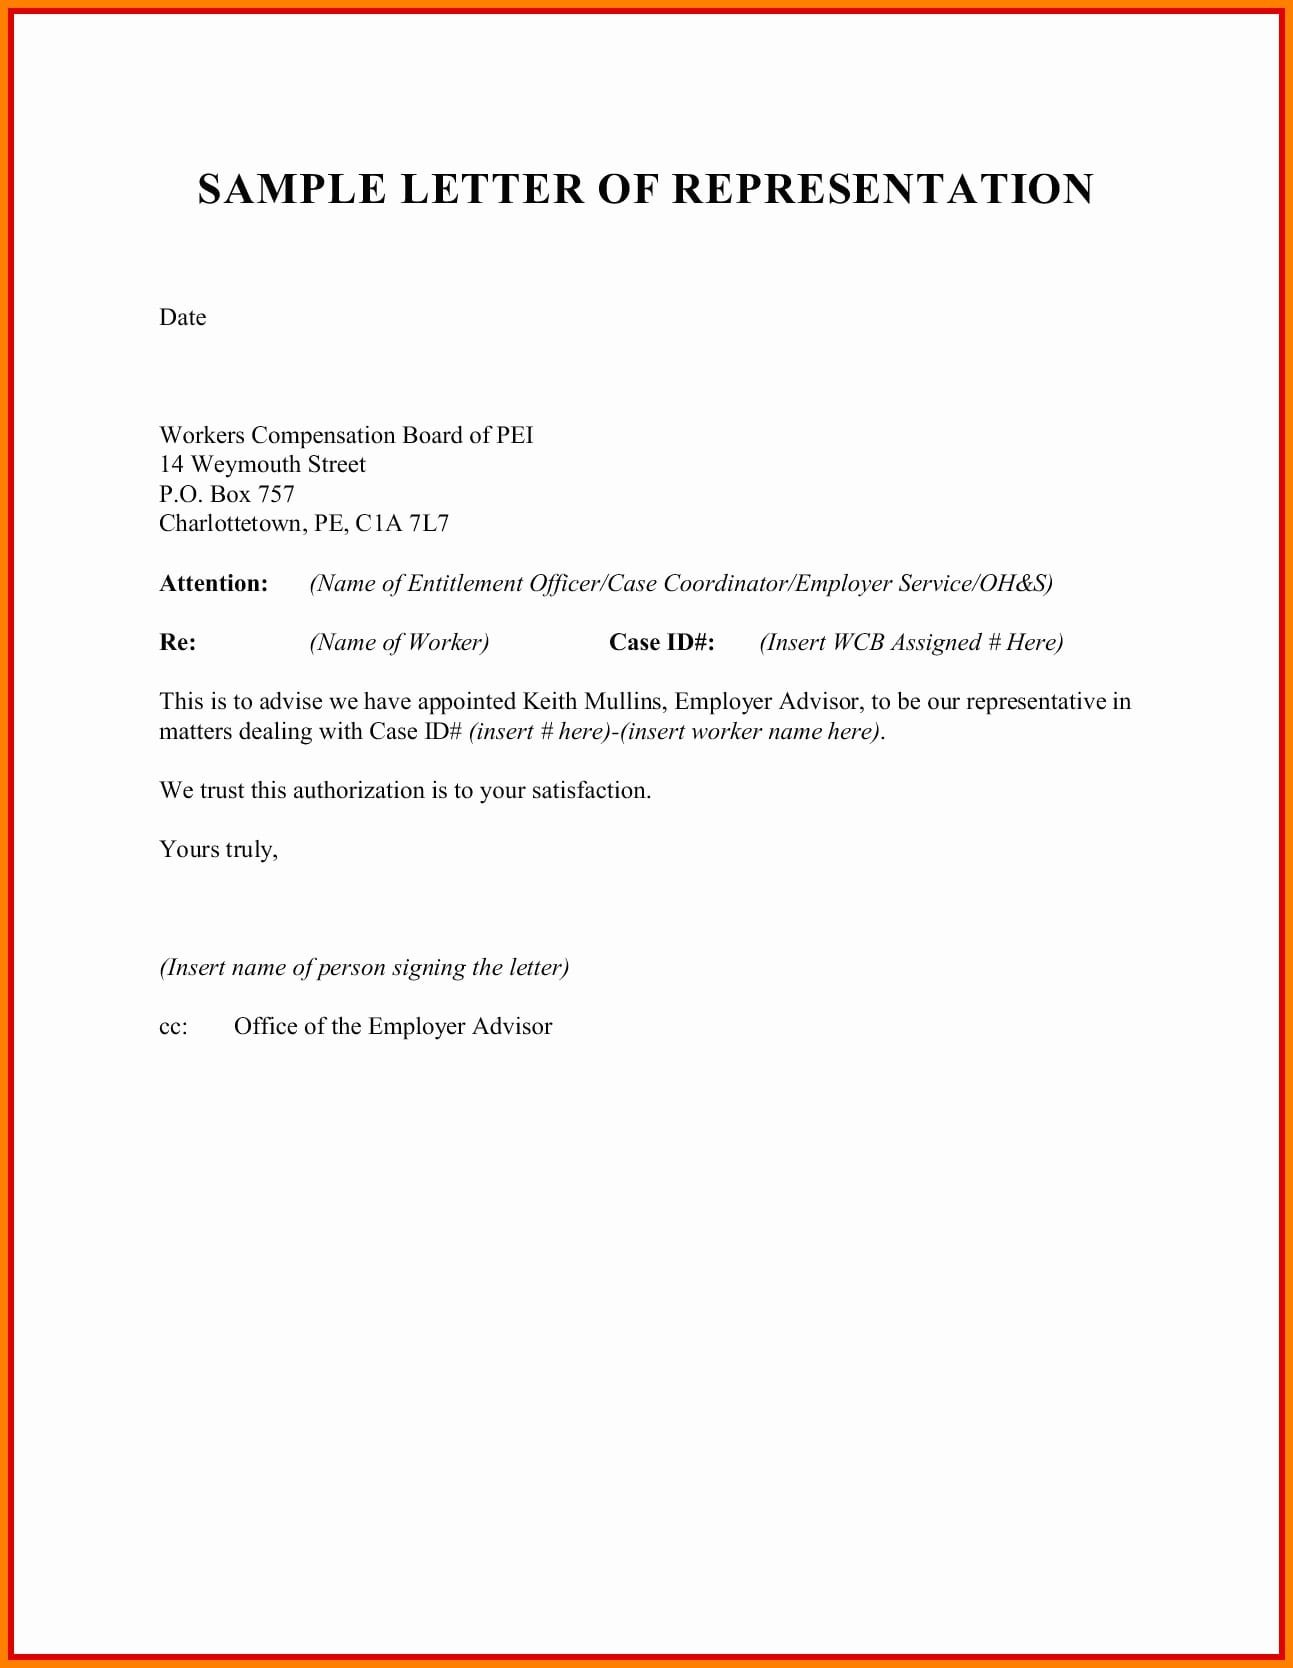 Letter Of Authorization To Represent Examples  Pdf  Examples with regard to Certificate Of Authorization Template